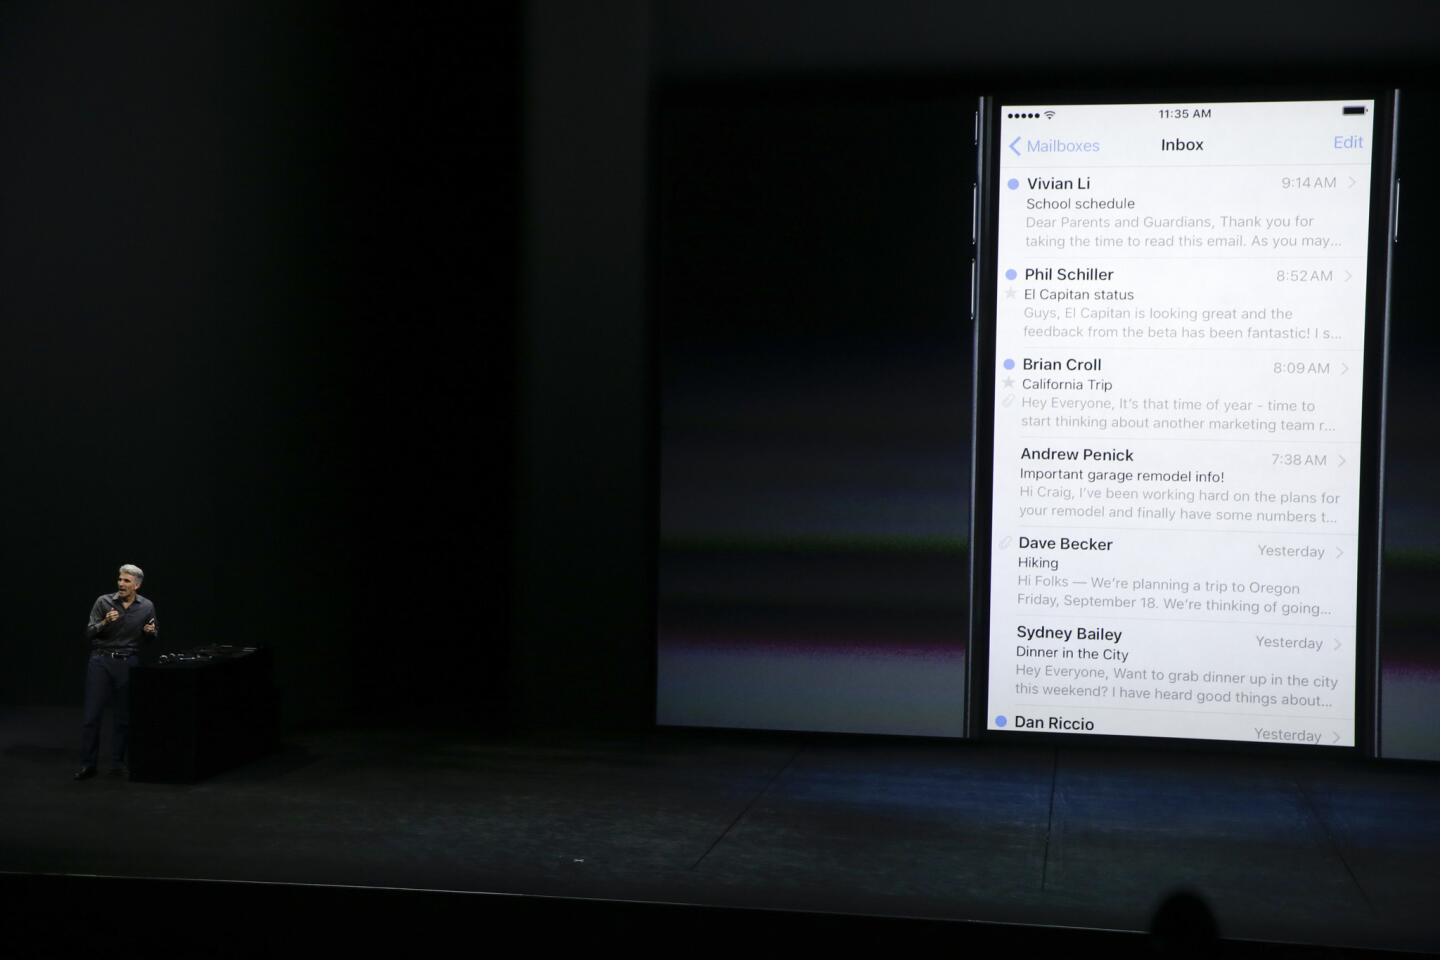 Craig Federighi, senior vice president of Software Engineering, discusses the features of the new iPhone 6s and iPhone 6s Plus during the Apple event at the Bill Graham Civic Auditorium in San Francisco, Wednesday, Sept. 9, 2015. (AP Photo/Eric Risberg)